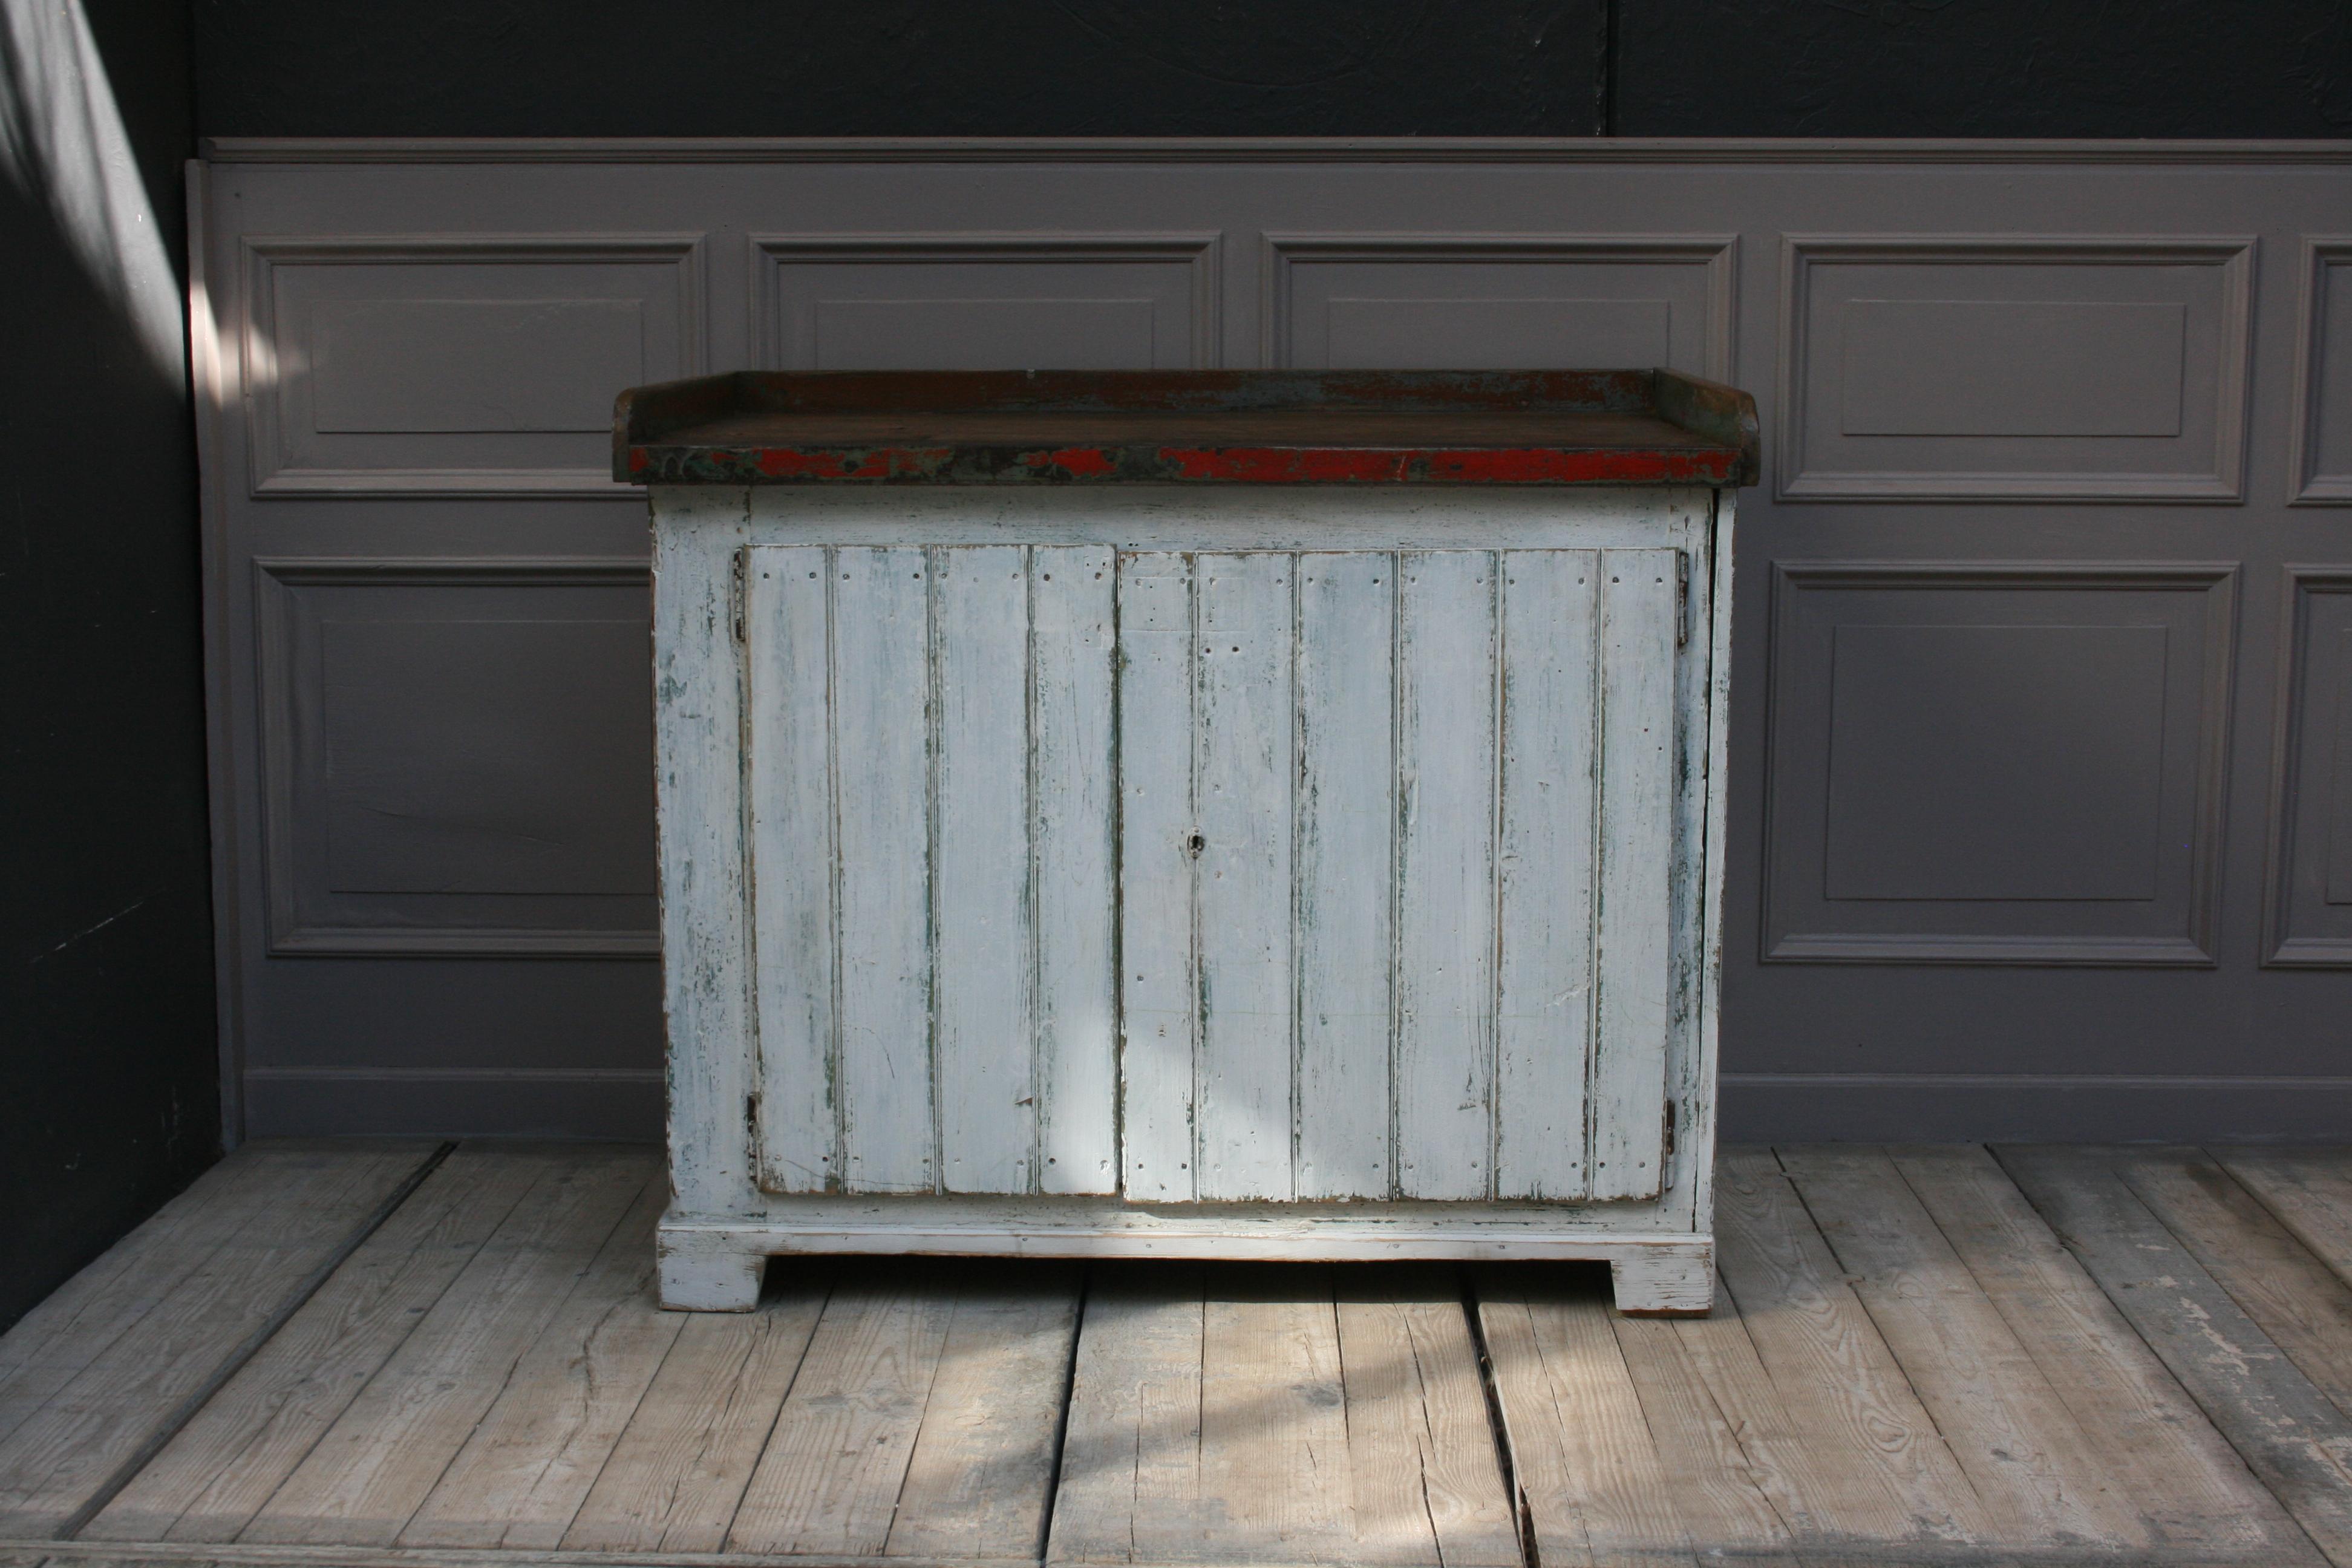 Exceptional German vintage industrial workbench in original paint with beautiful Patina, restored ready to live. 2 doors behind are a shelf and a drawer located.
Ideal as a unique washbasin in the kitchen or bathroom, or for gastronomy and fashion